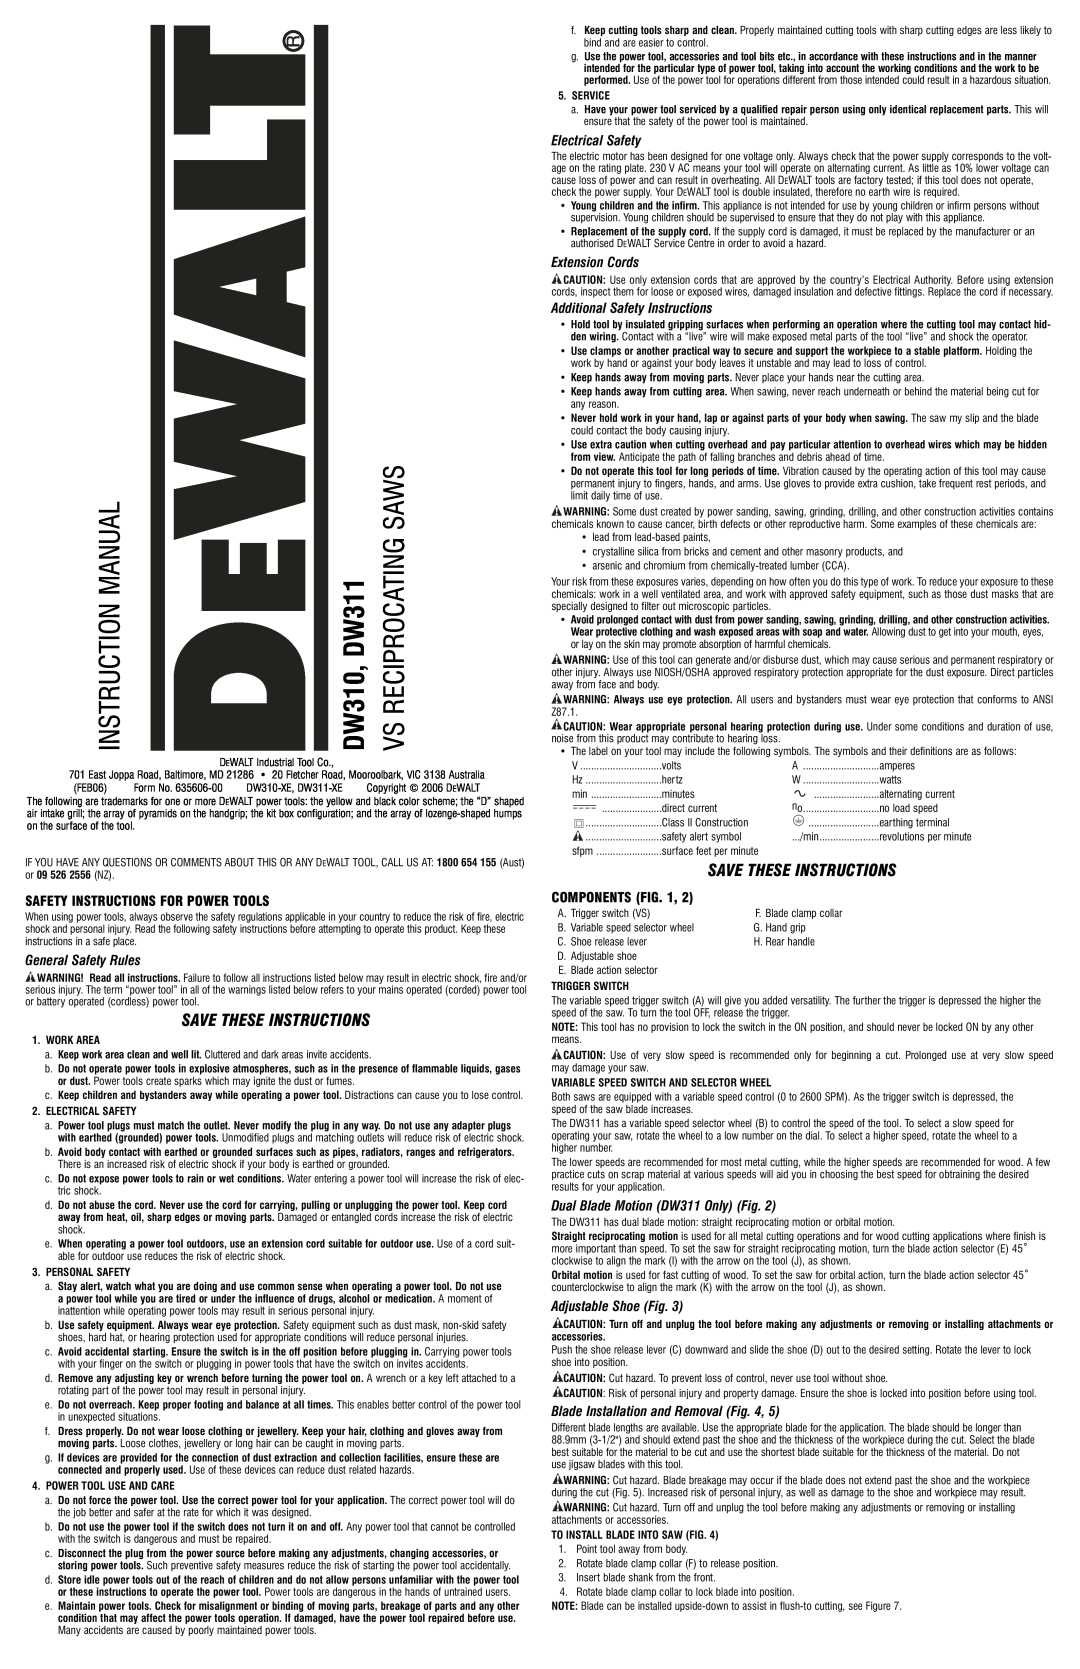 DeWalt DW311K, DW310K instruction manual General Safety Rules, Save These Instructions, Additional Specific Safety Rules 